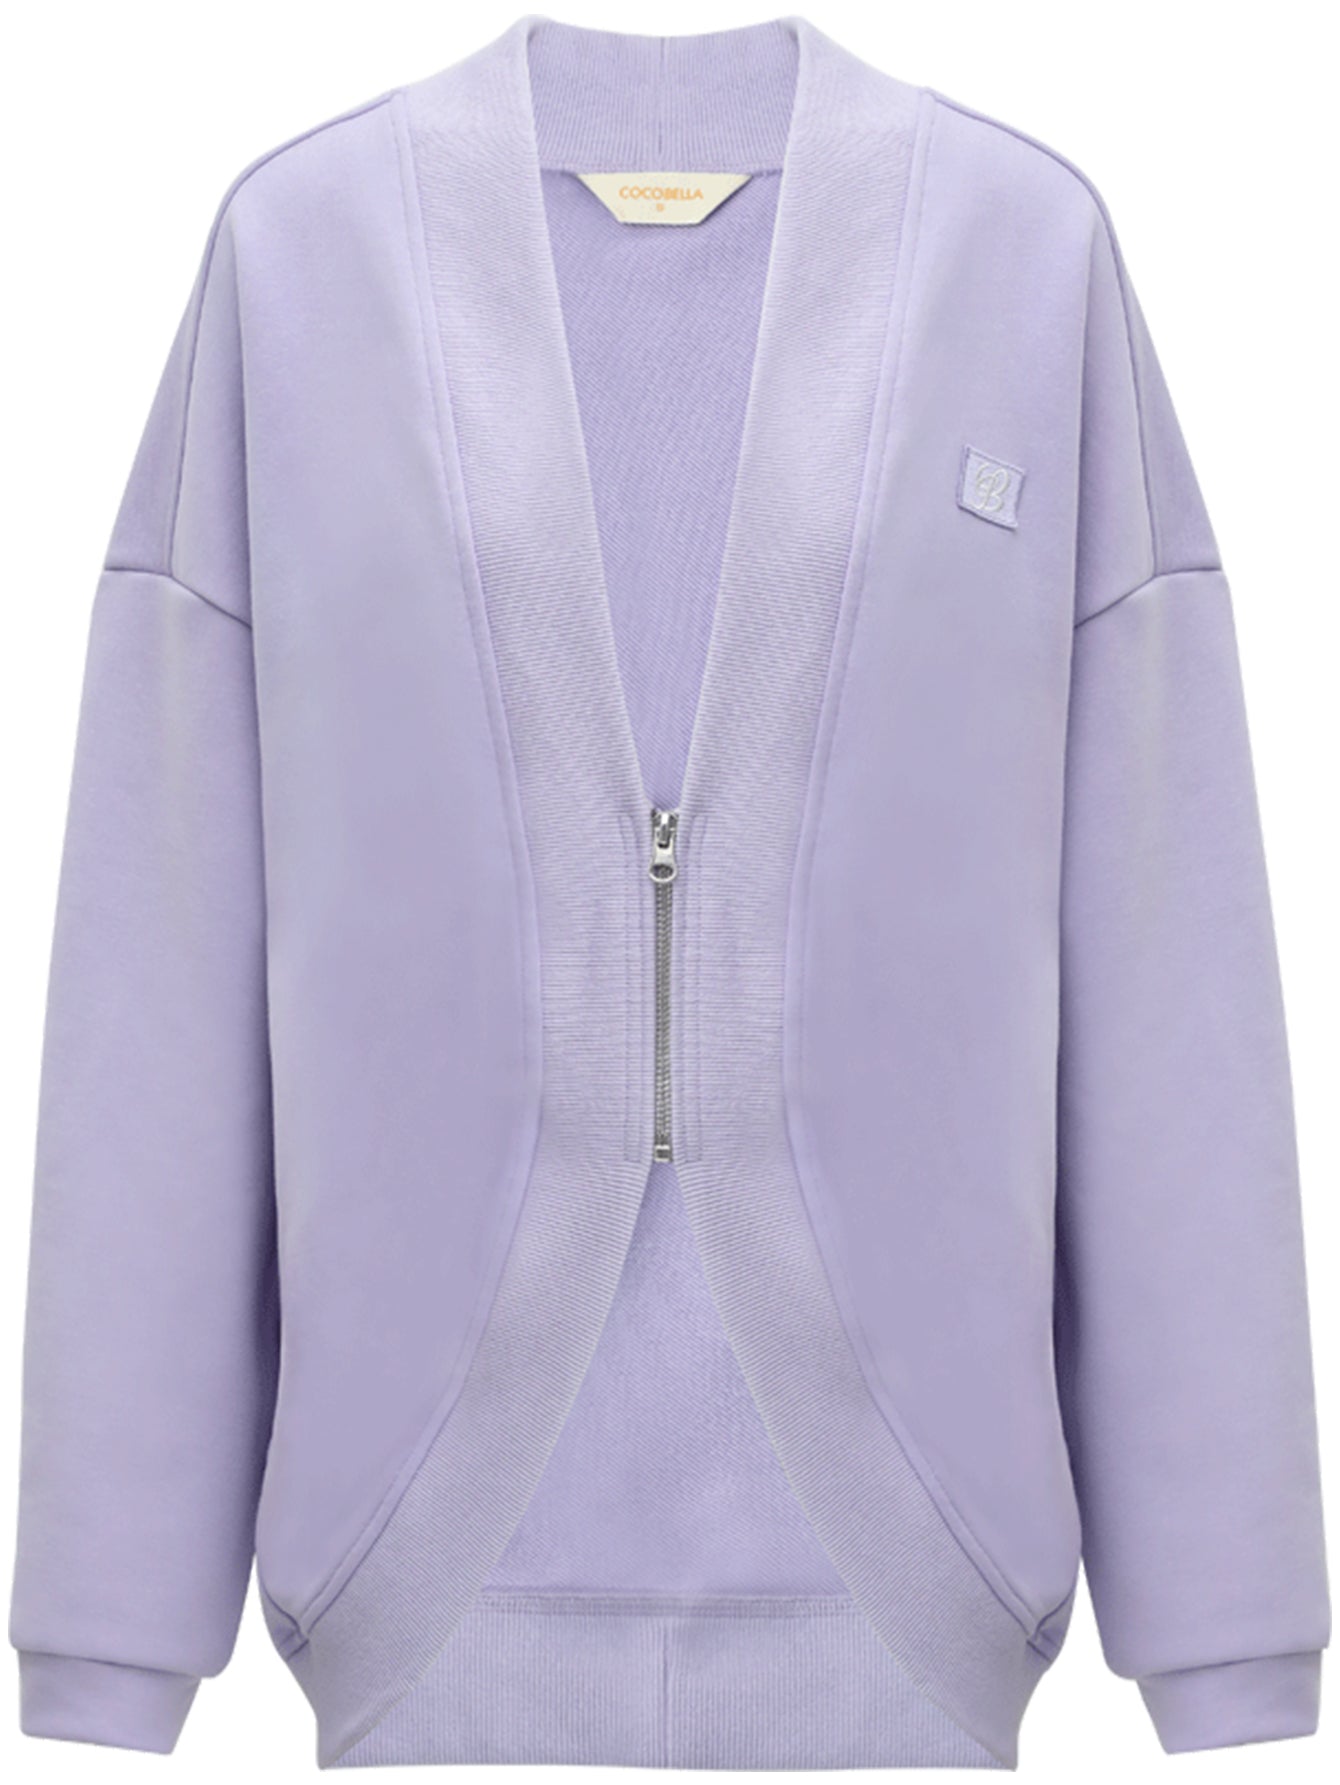 sweet-relaxed-fit-lavender-cardigan_all_lavender_4.jpg